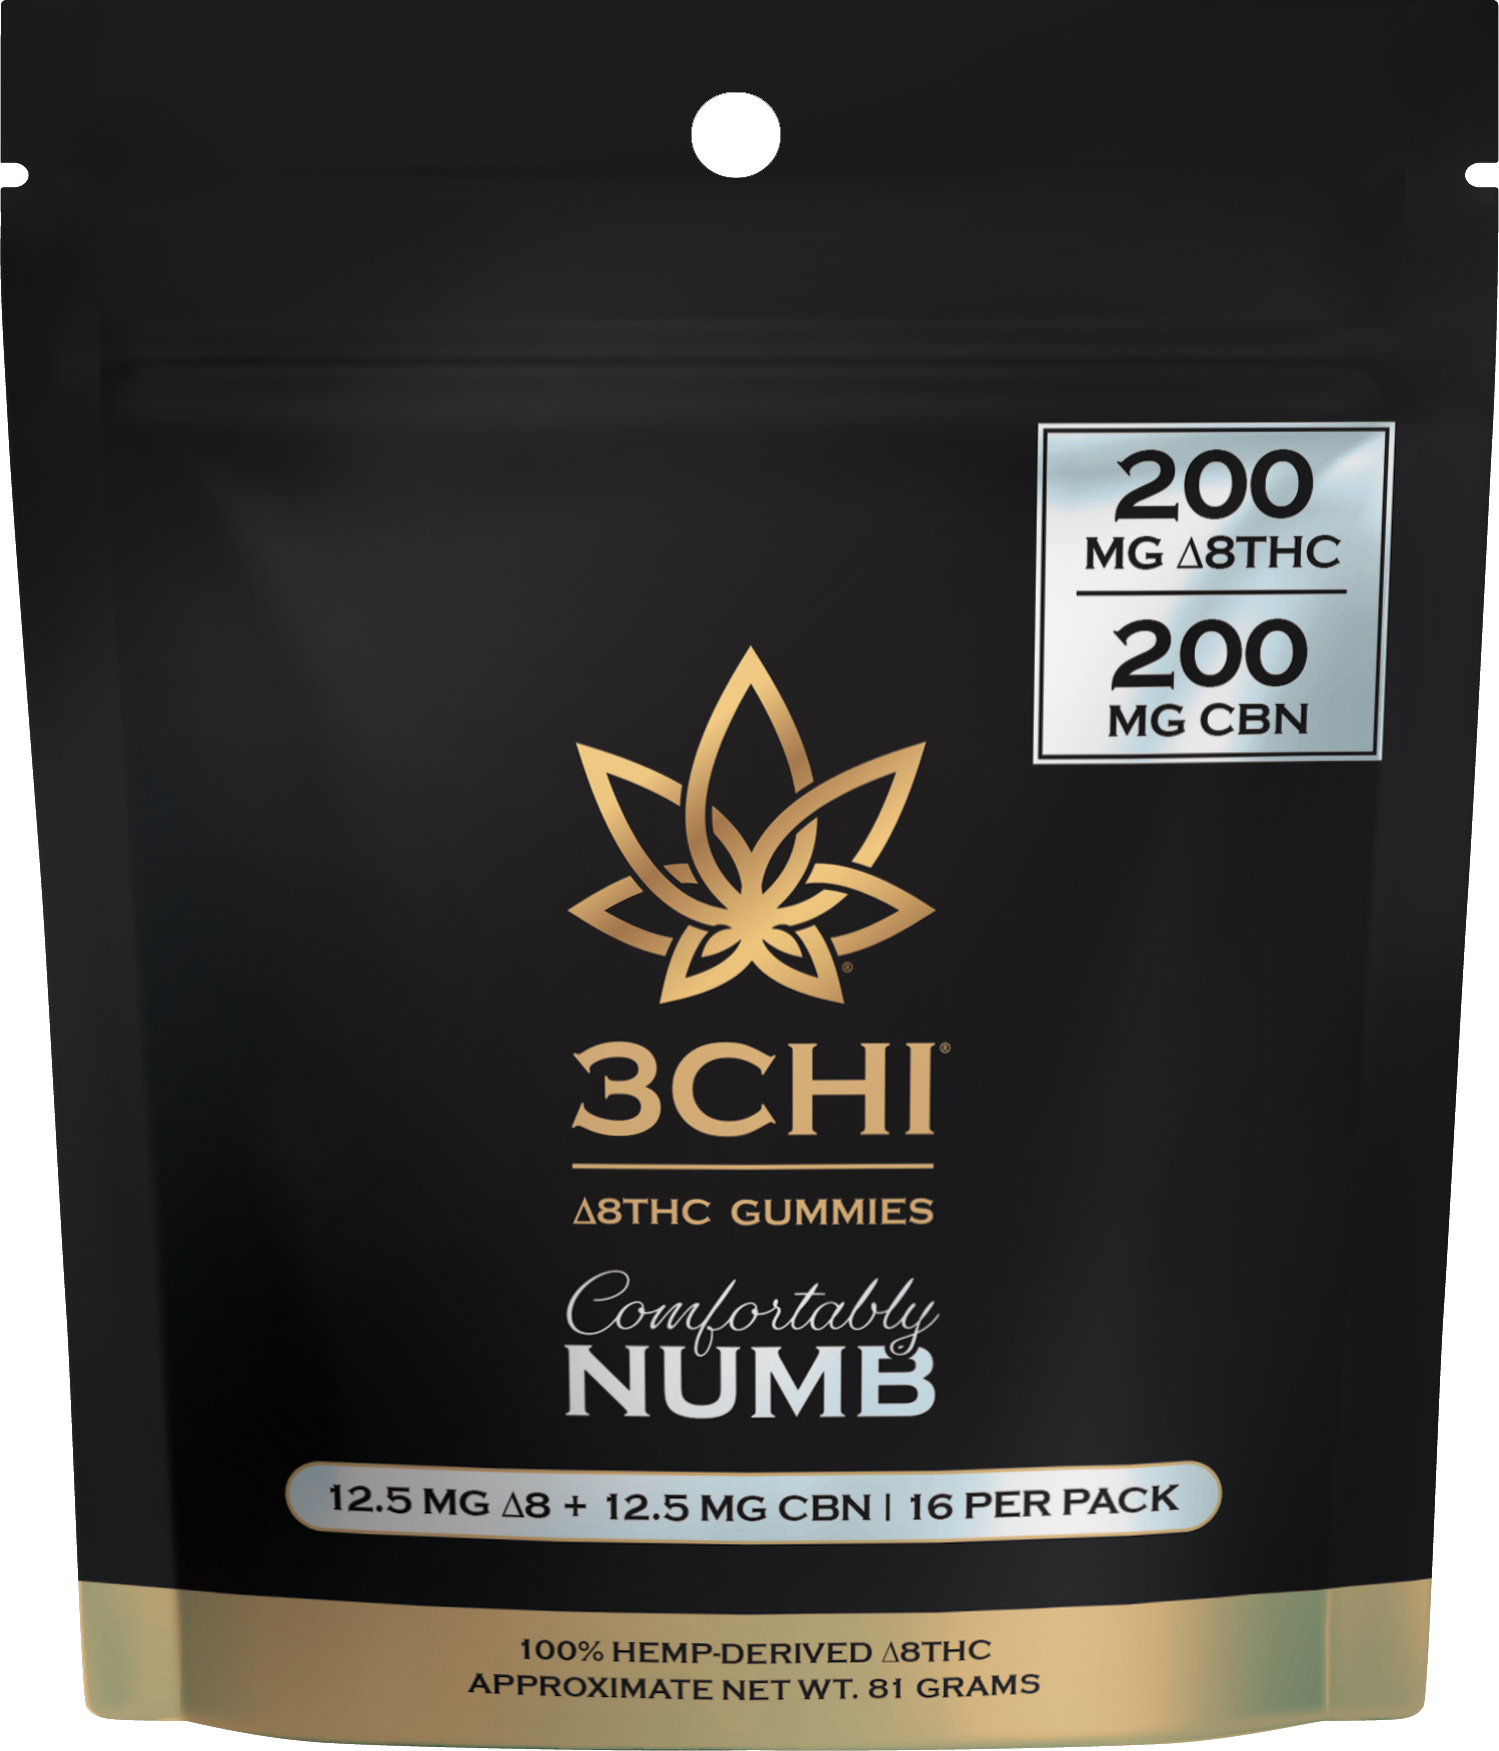 Our Comfortably Numb Delta 8 gummies are popular for potentially aiding with sleep quality. Delta 8 gummies will have different reactions for different people.